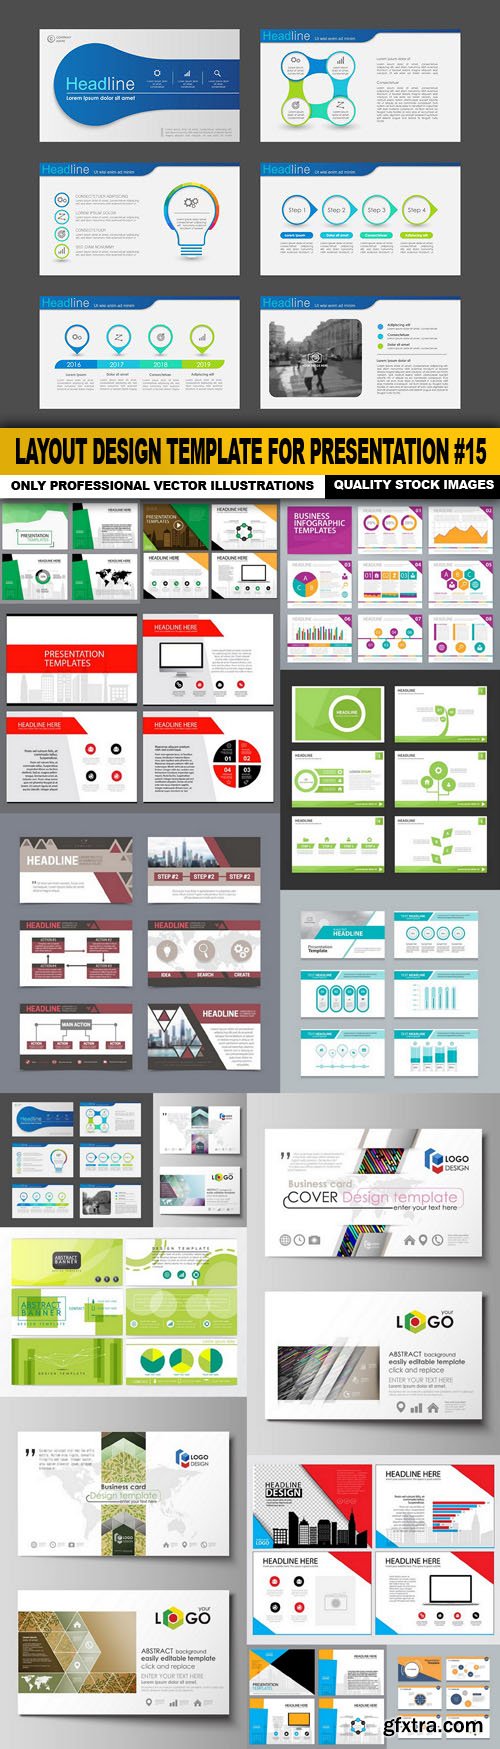 Layout Design Template For Presentation #15 - 15 Vector